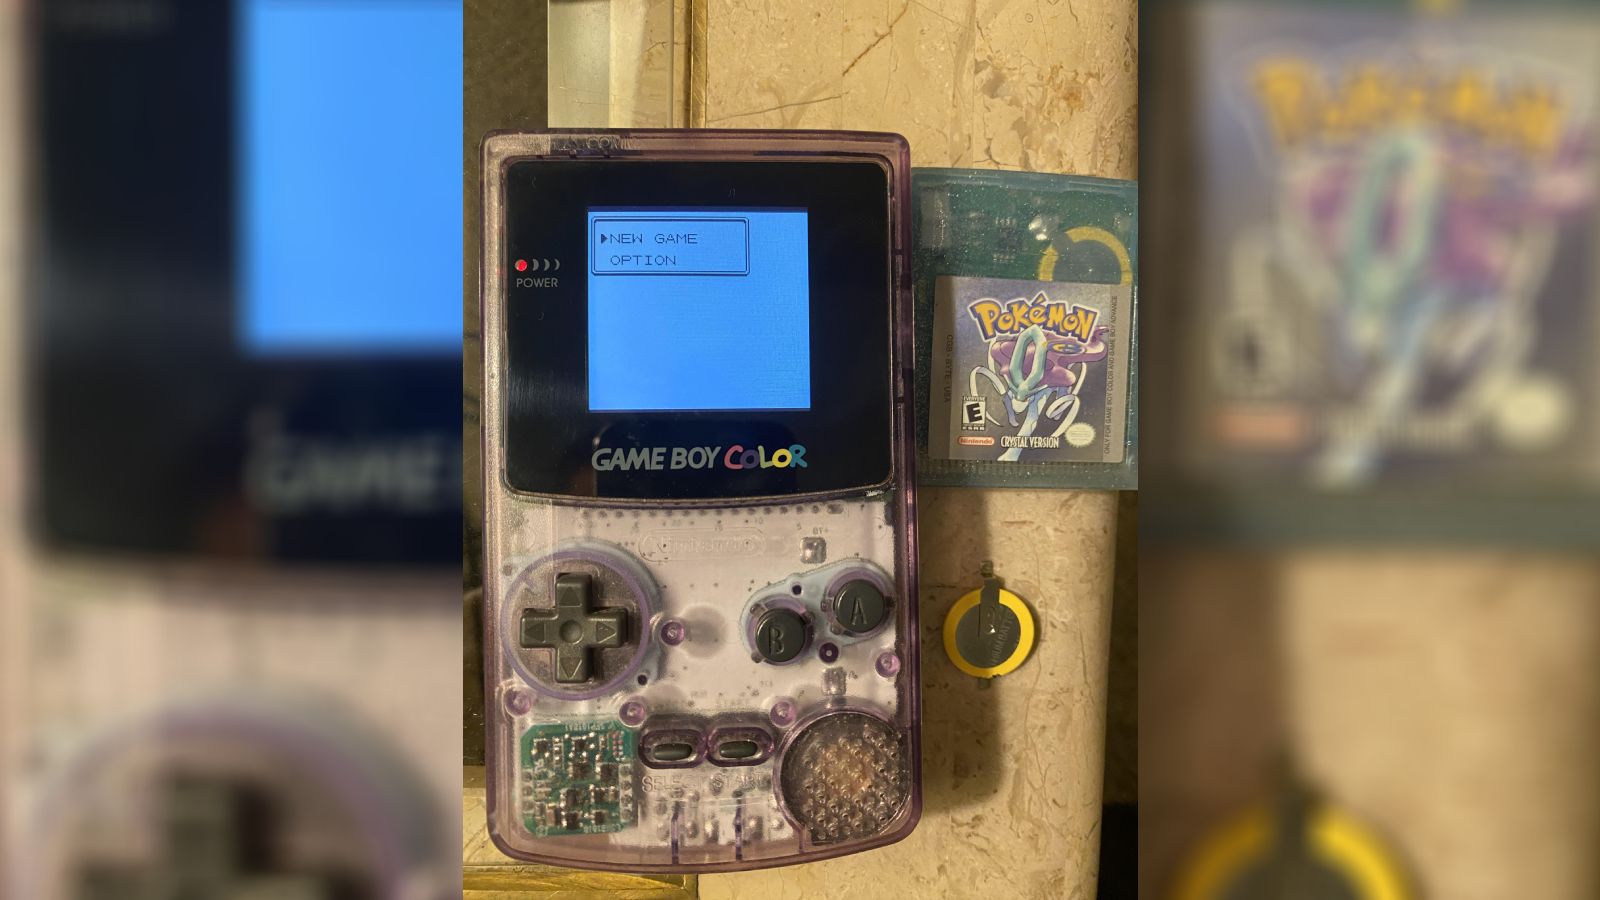 Warning: Pokemon Game Carts at Risk of Total Failure, Players Advised to Make Backups